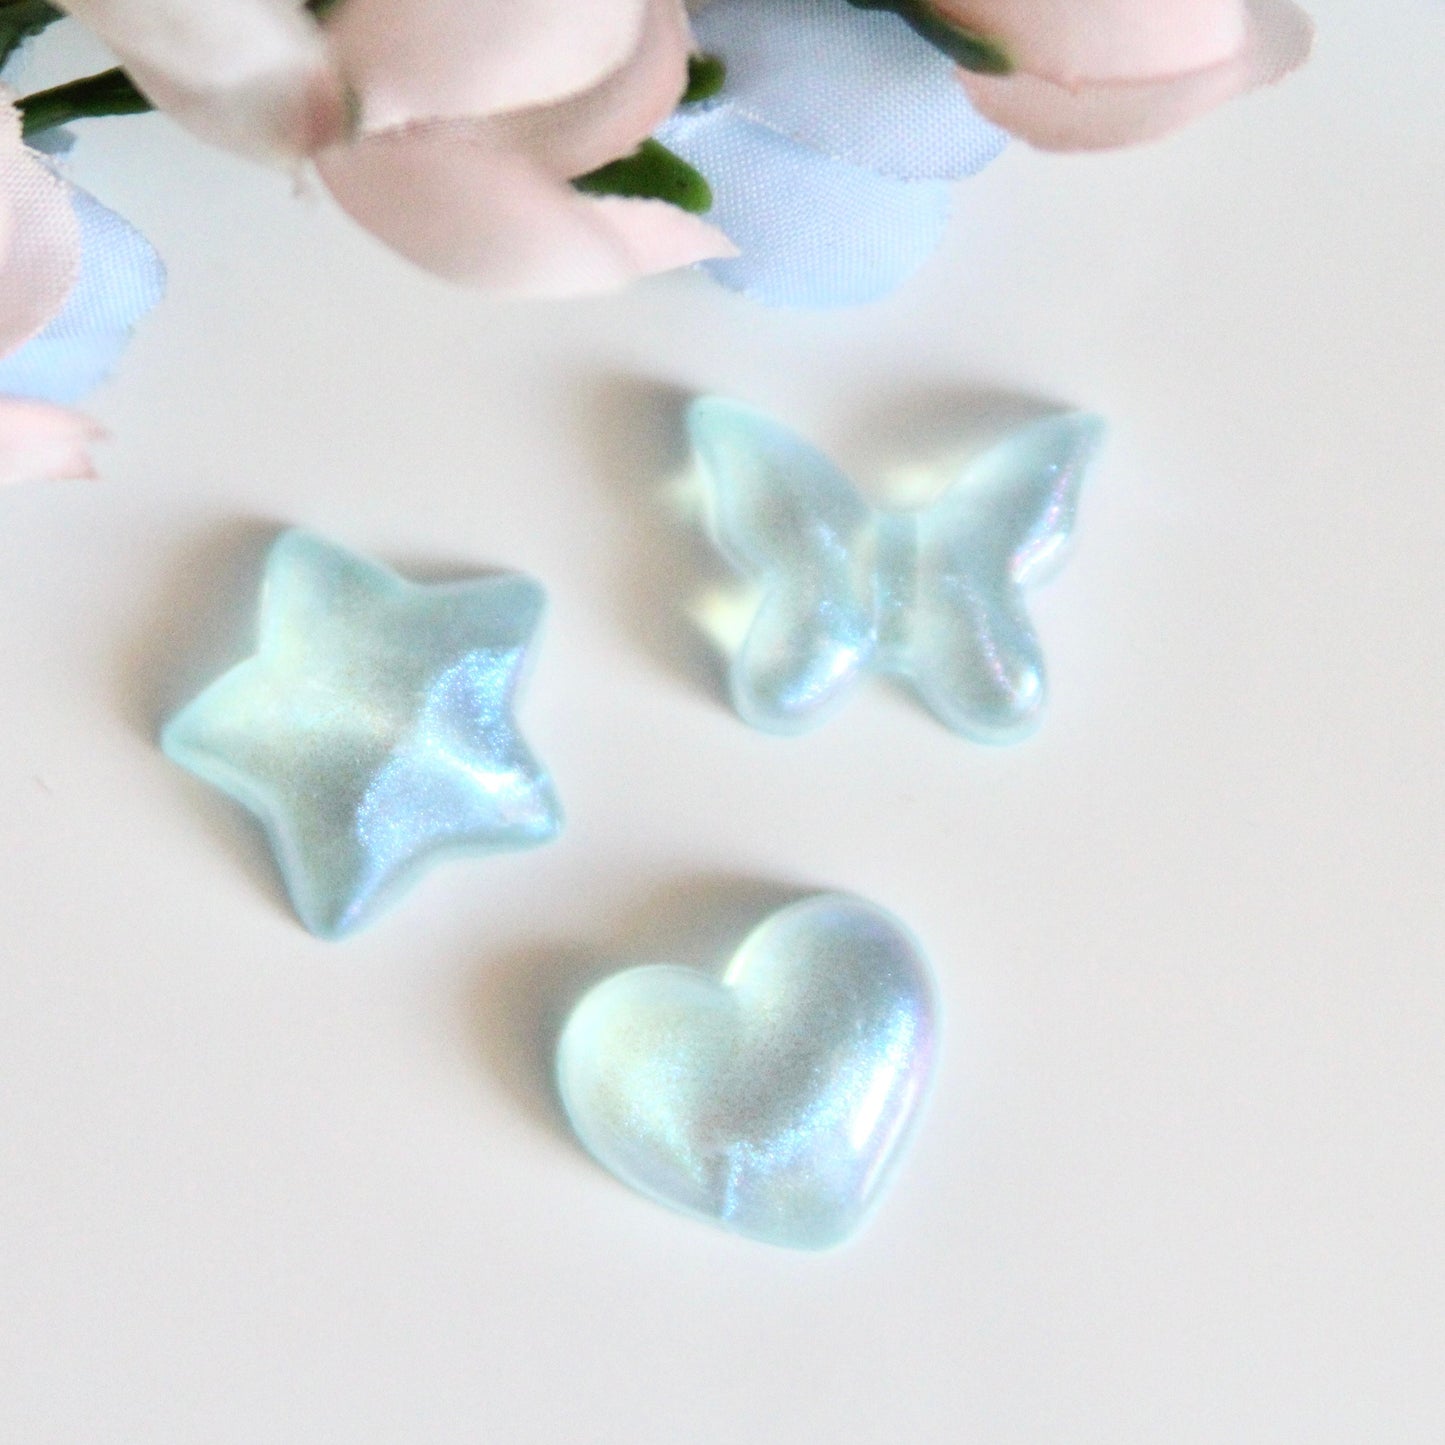 SHIMMERY Heart Butterfly Star Shoe Charms | pink blue white